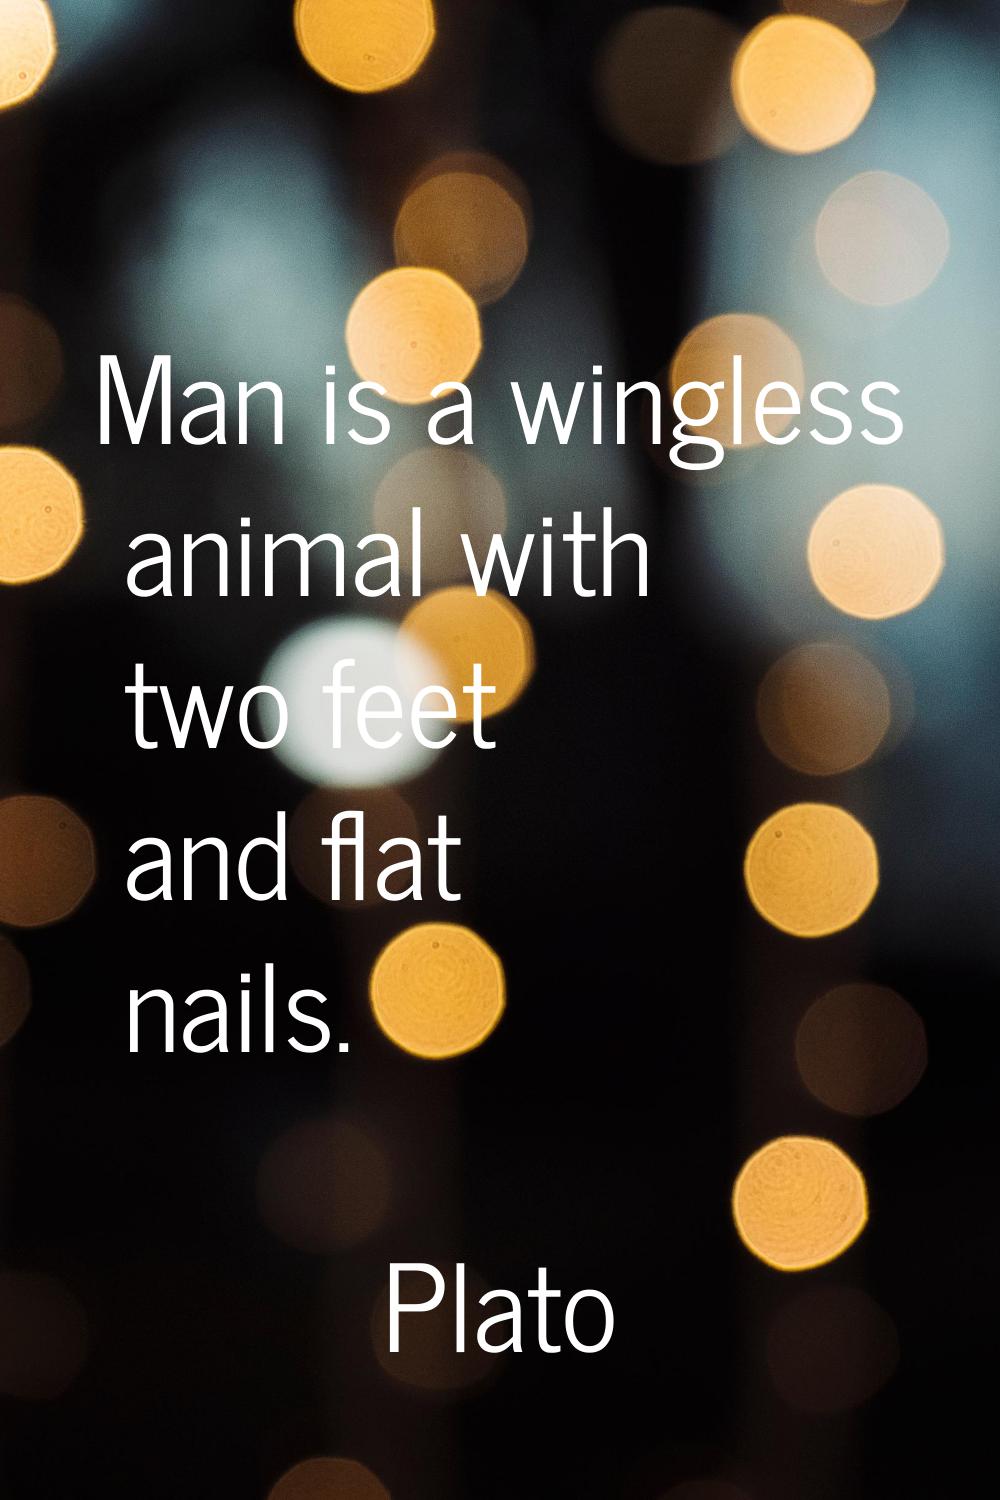 Man is a wingless animal with two feet and flat nails.